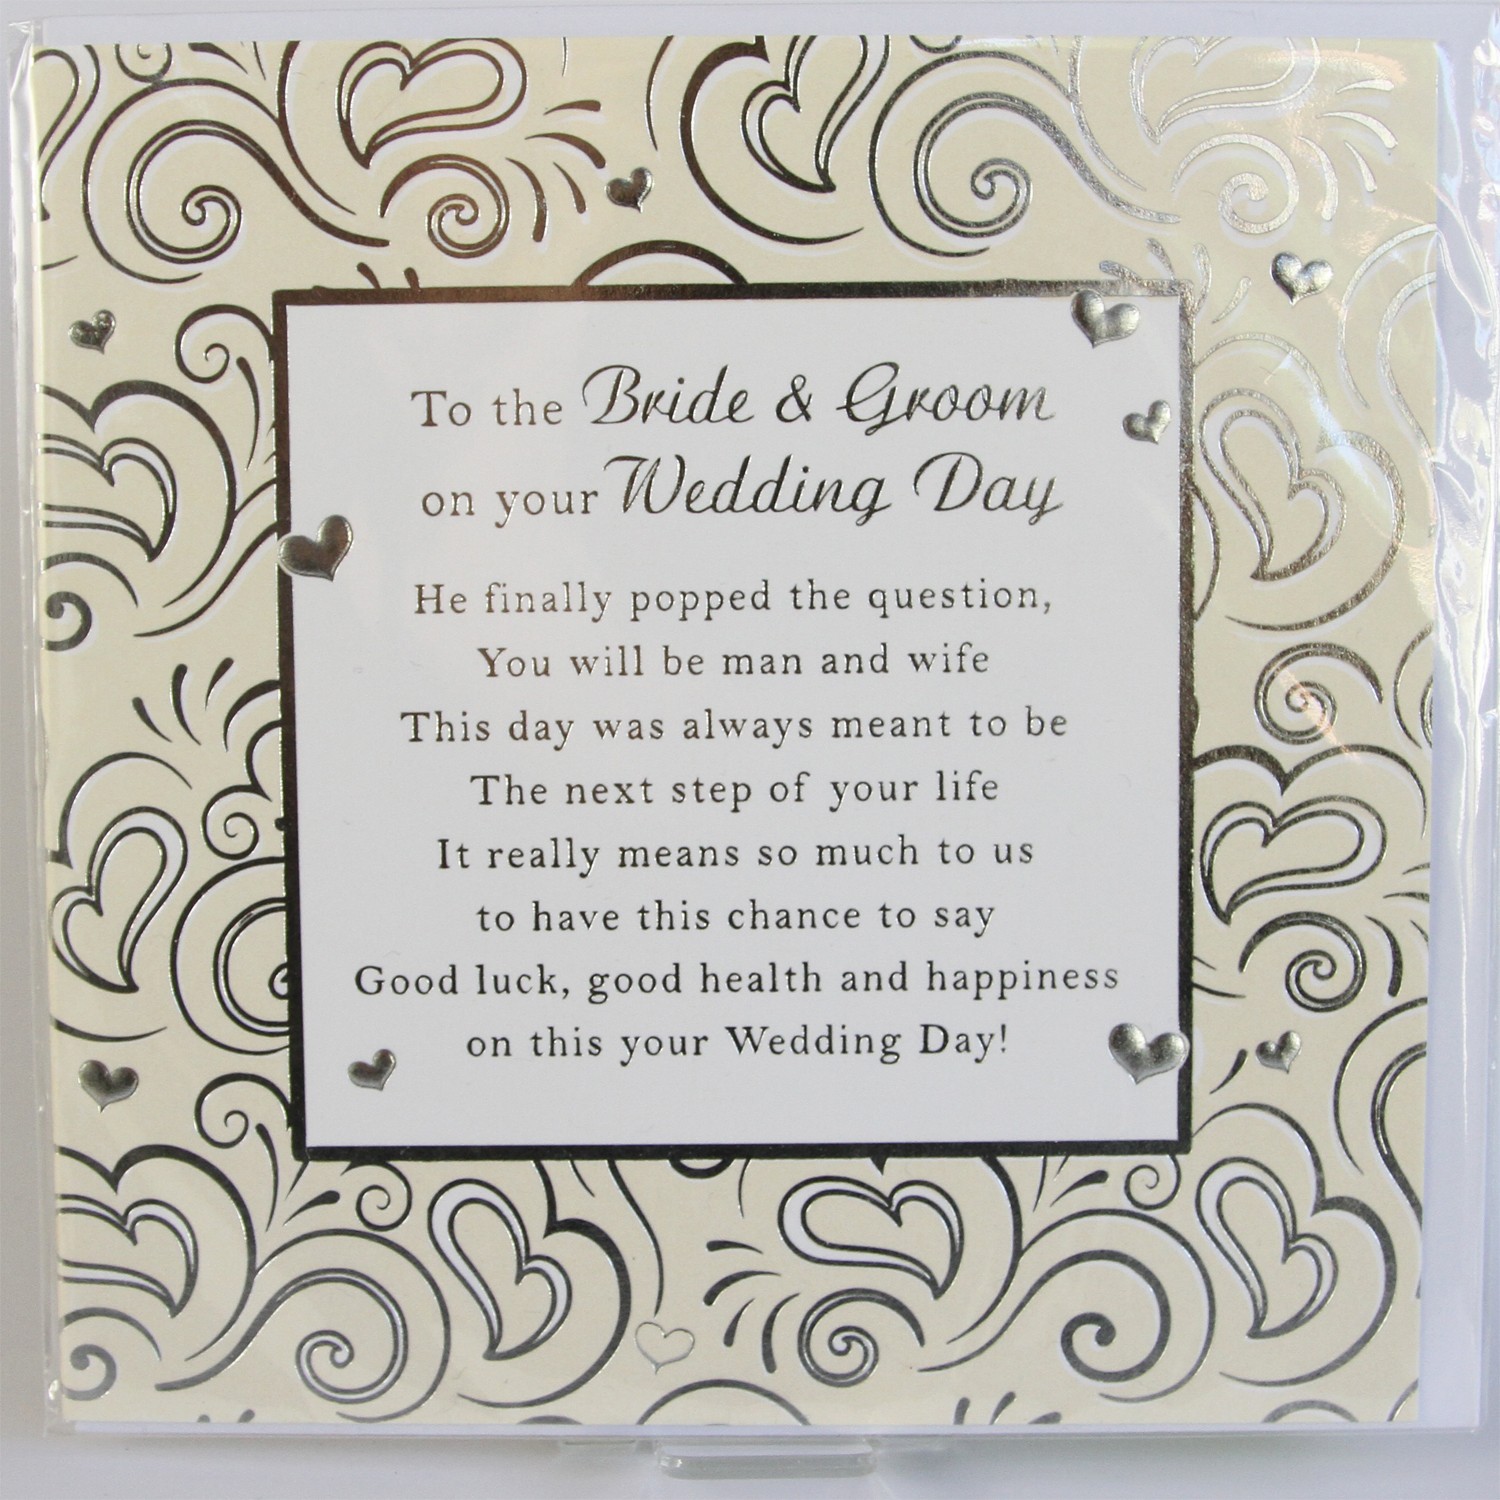 What To Say To The Bride And Groom In A Card